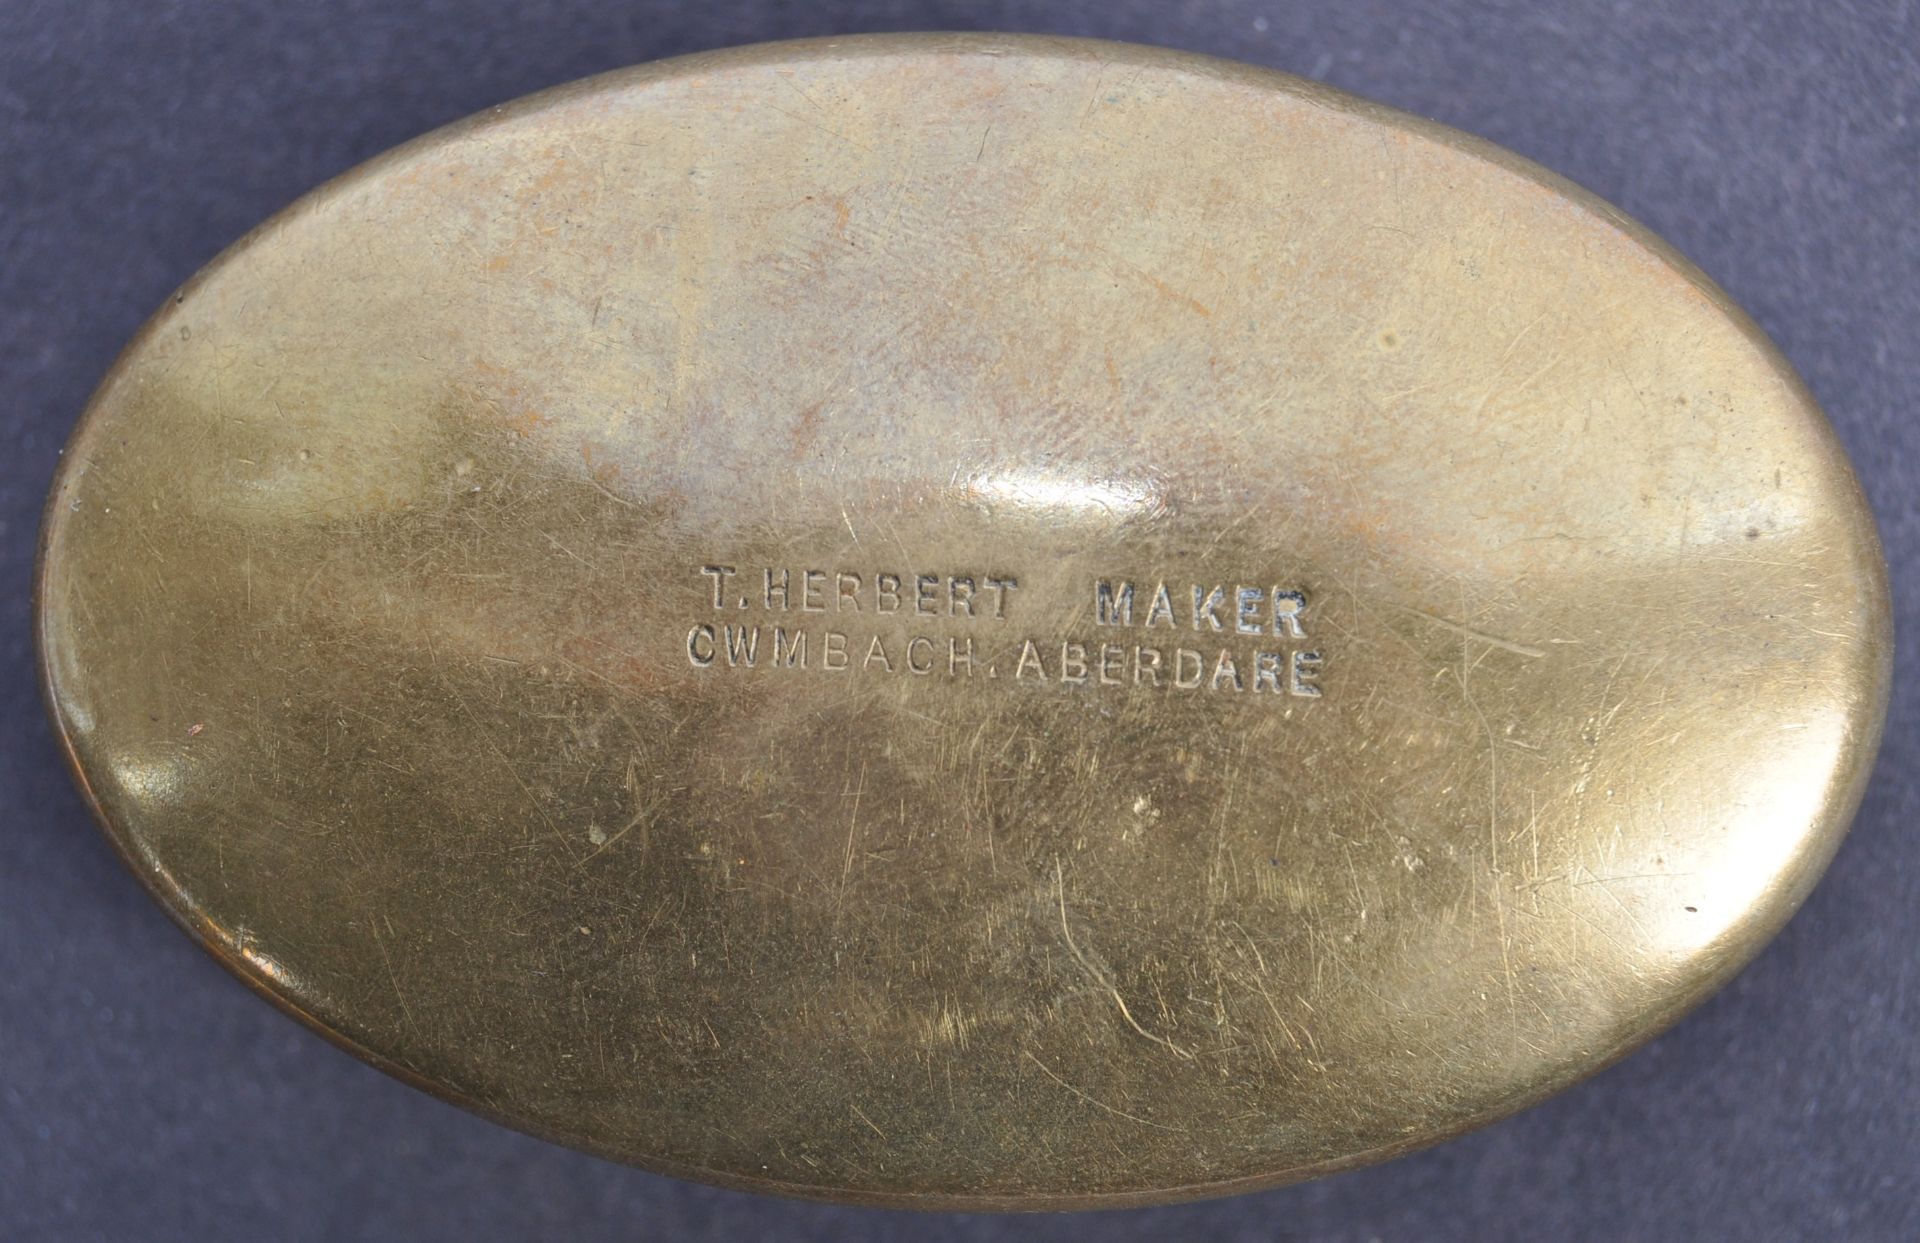 LATE 19TH CENTURY COAL MINERS BRASS TOBACCO / SNUFF BOX - Image 3 of 3